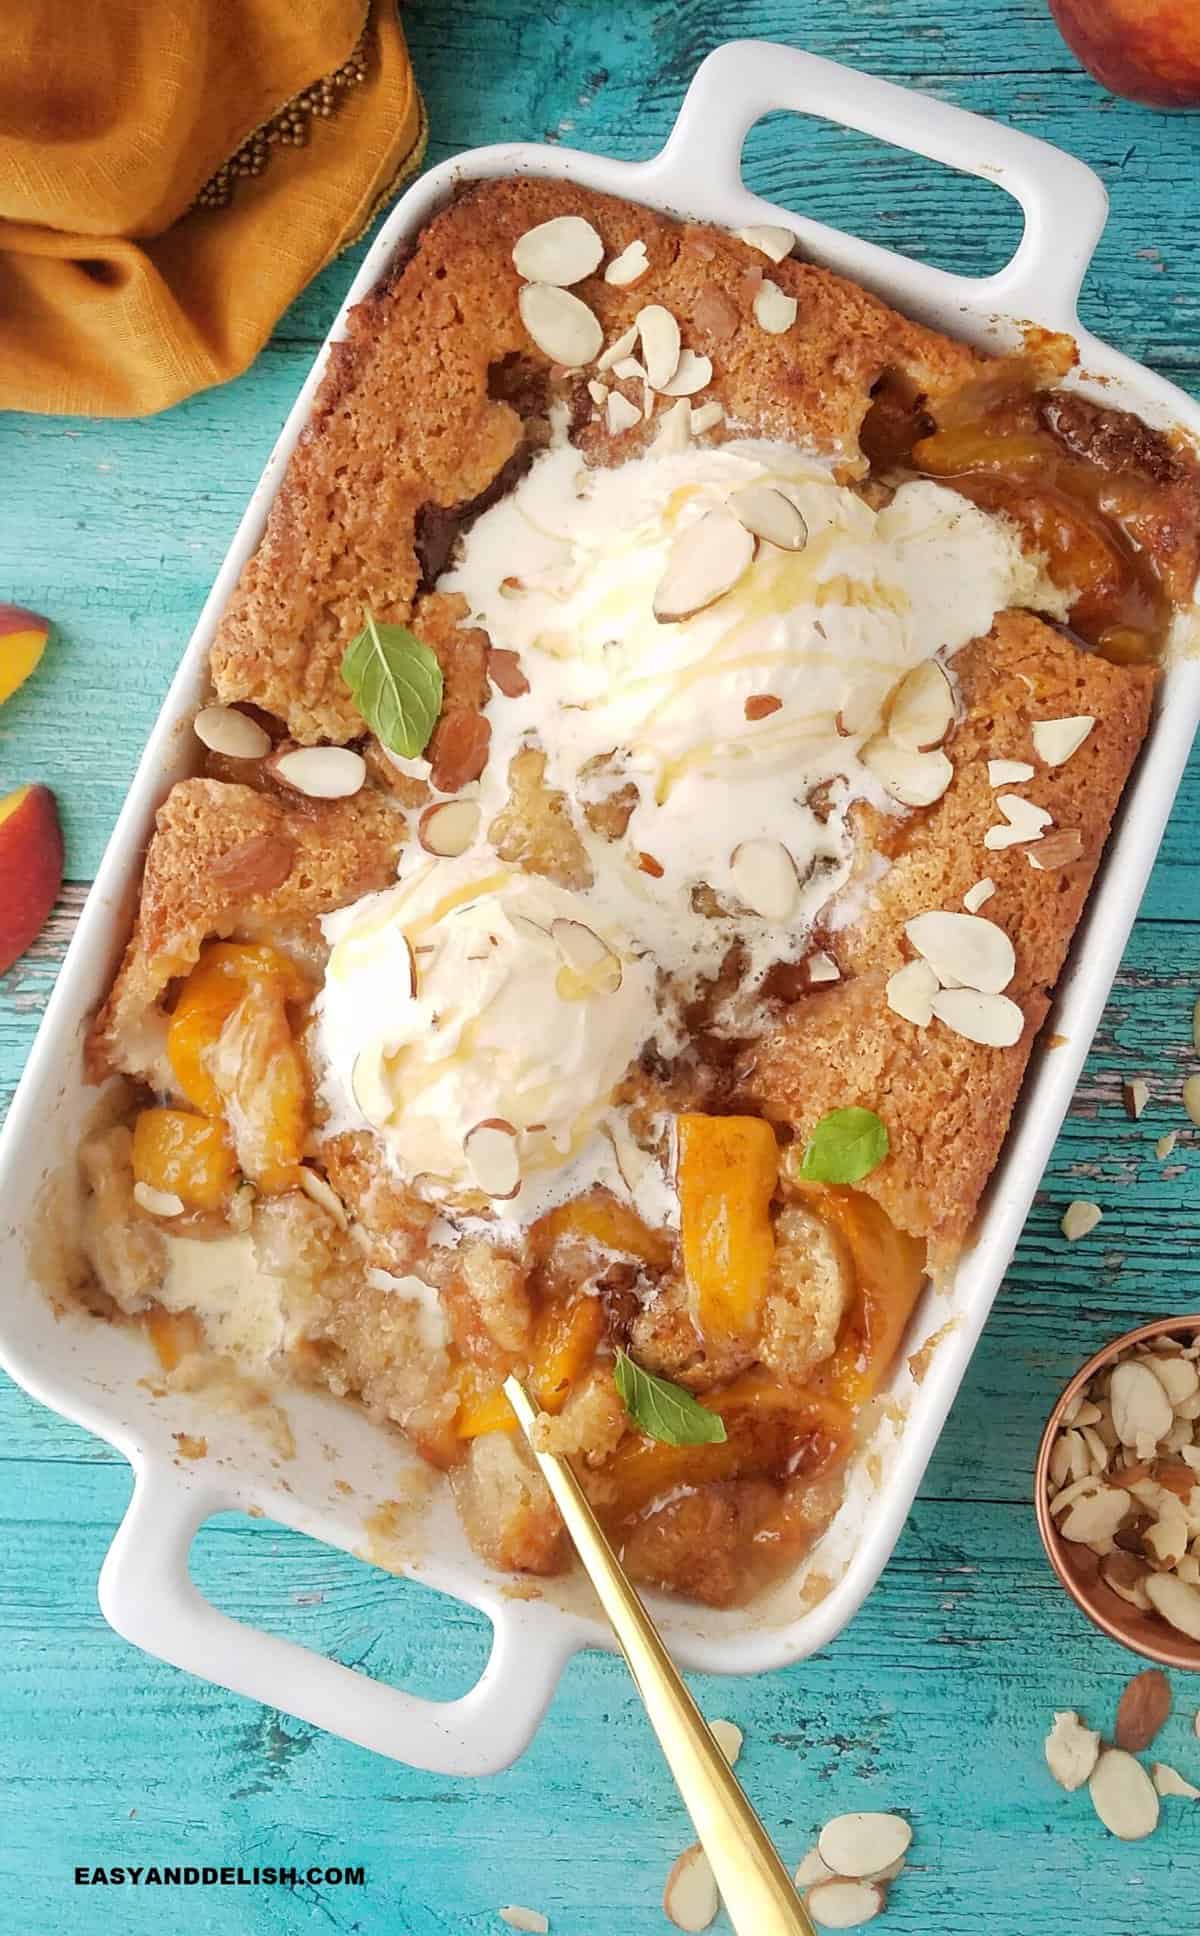 peach cobbler with canned peached topped with scoops of vanulla ice cream.